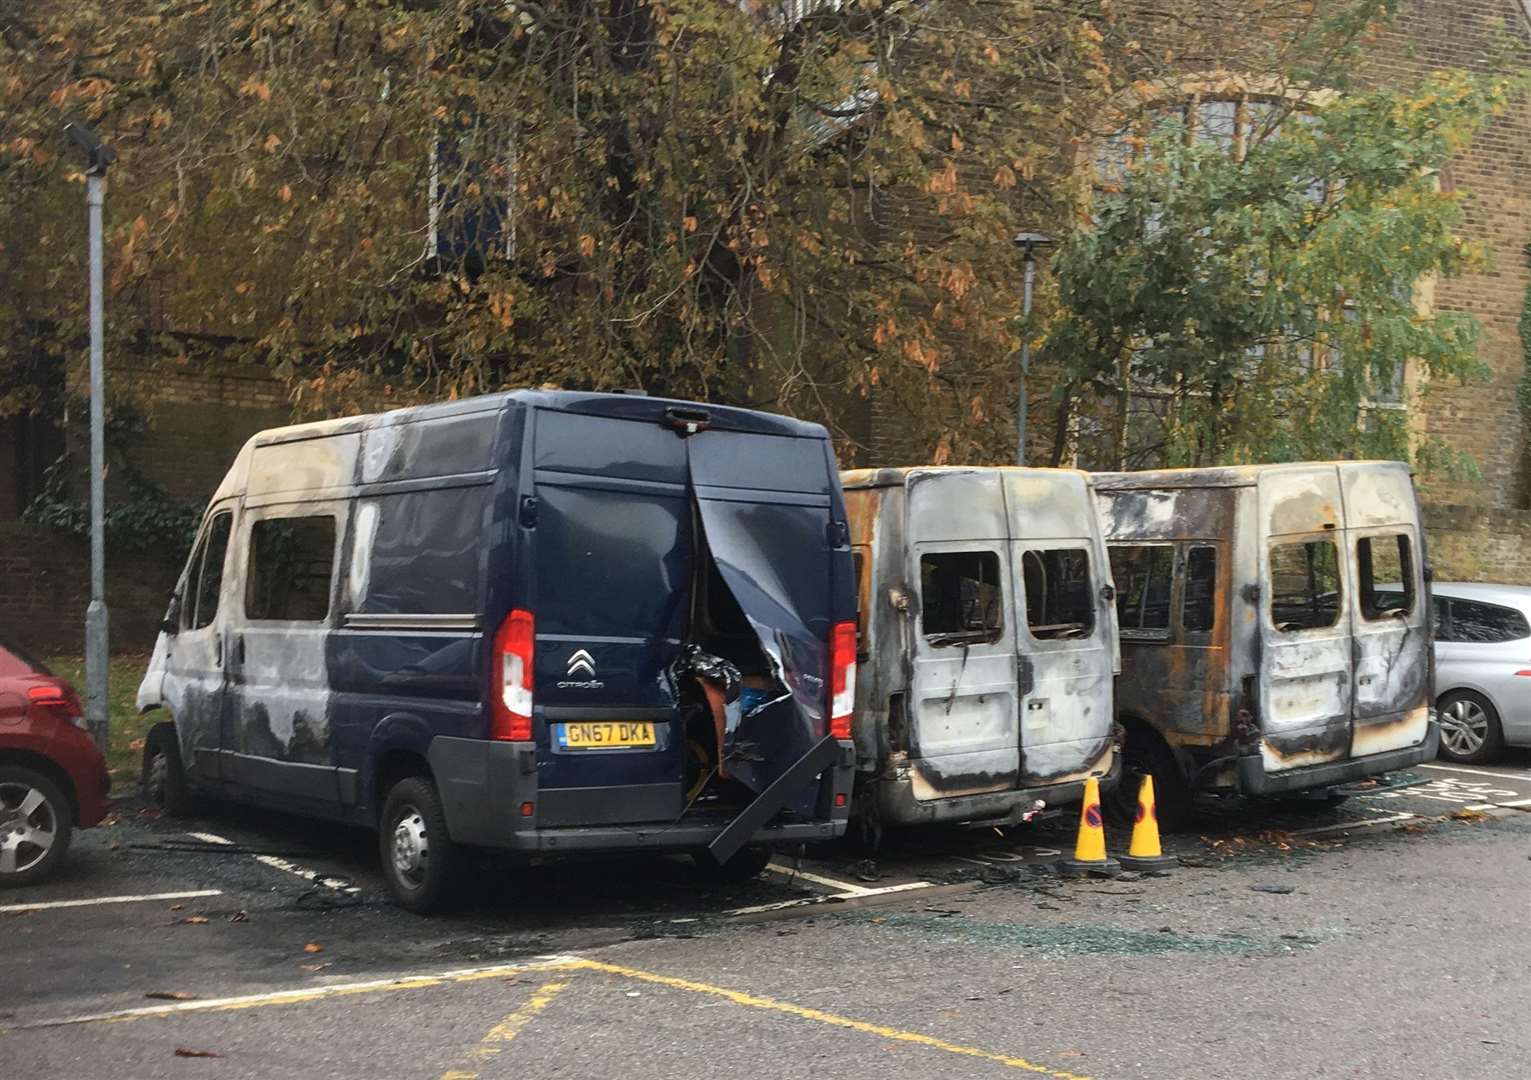 Three minibuses were torched outside Joynes House, Gravesend